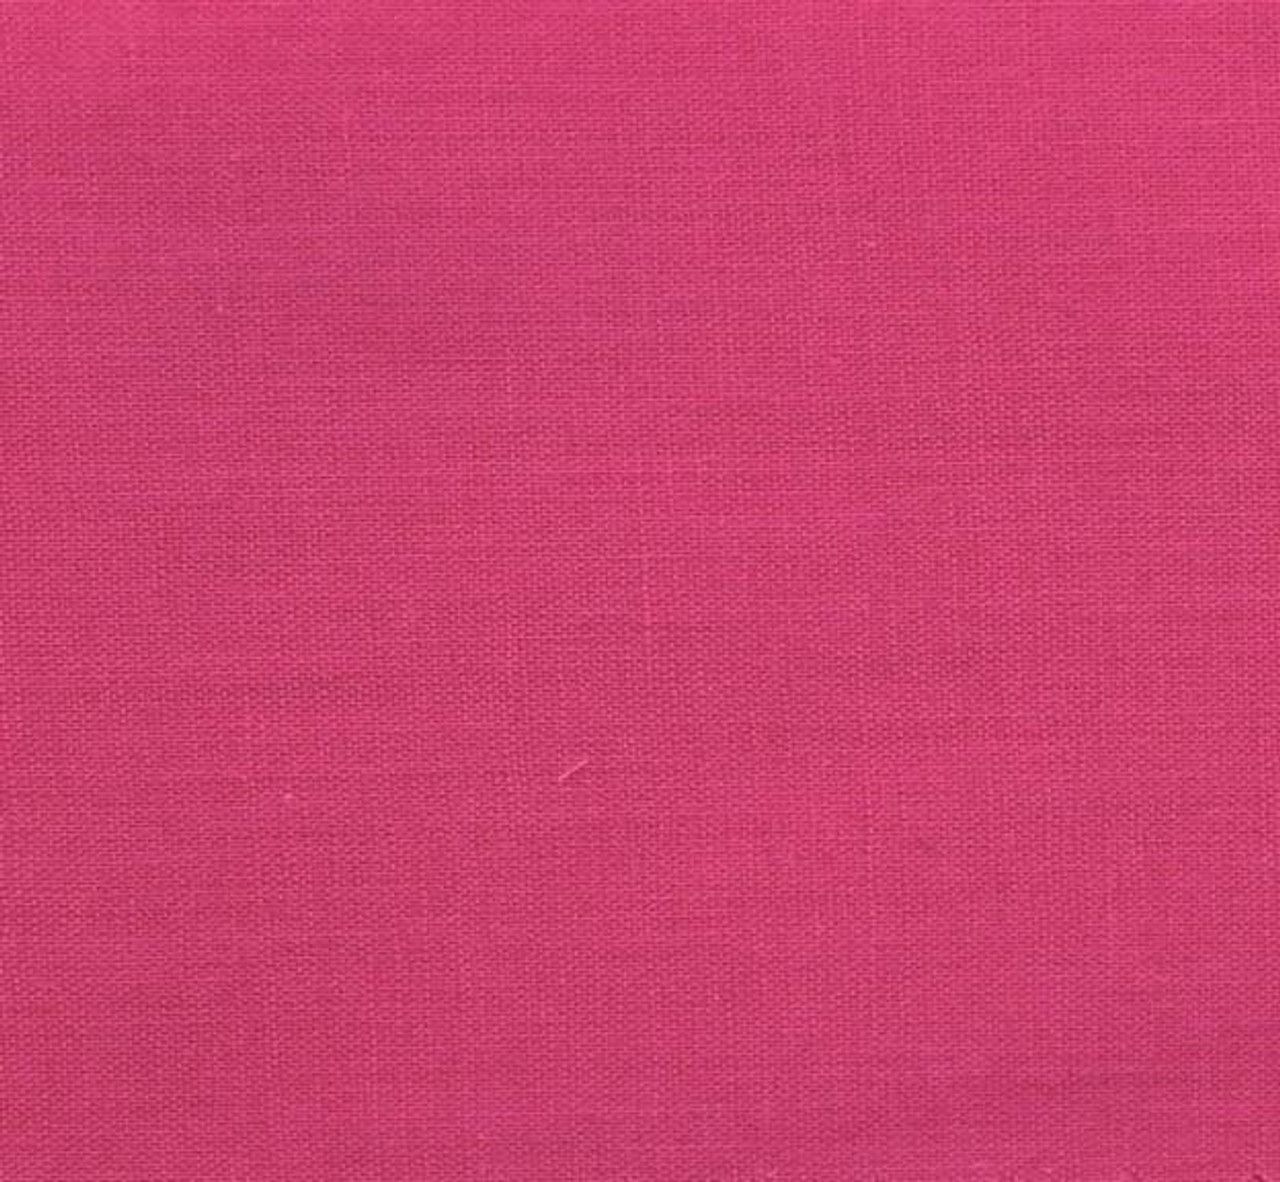 Texture Pink Cotton Fabric